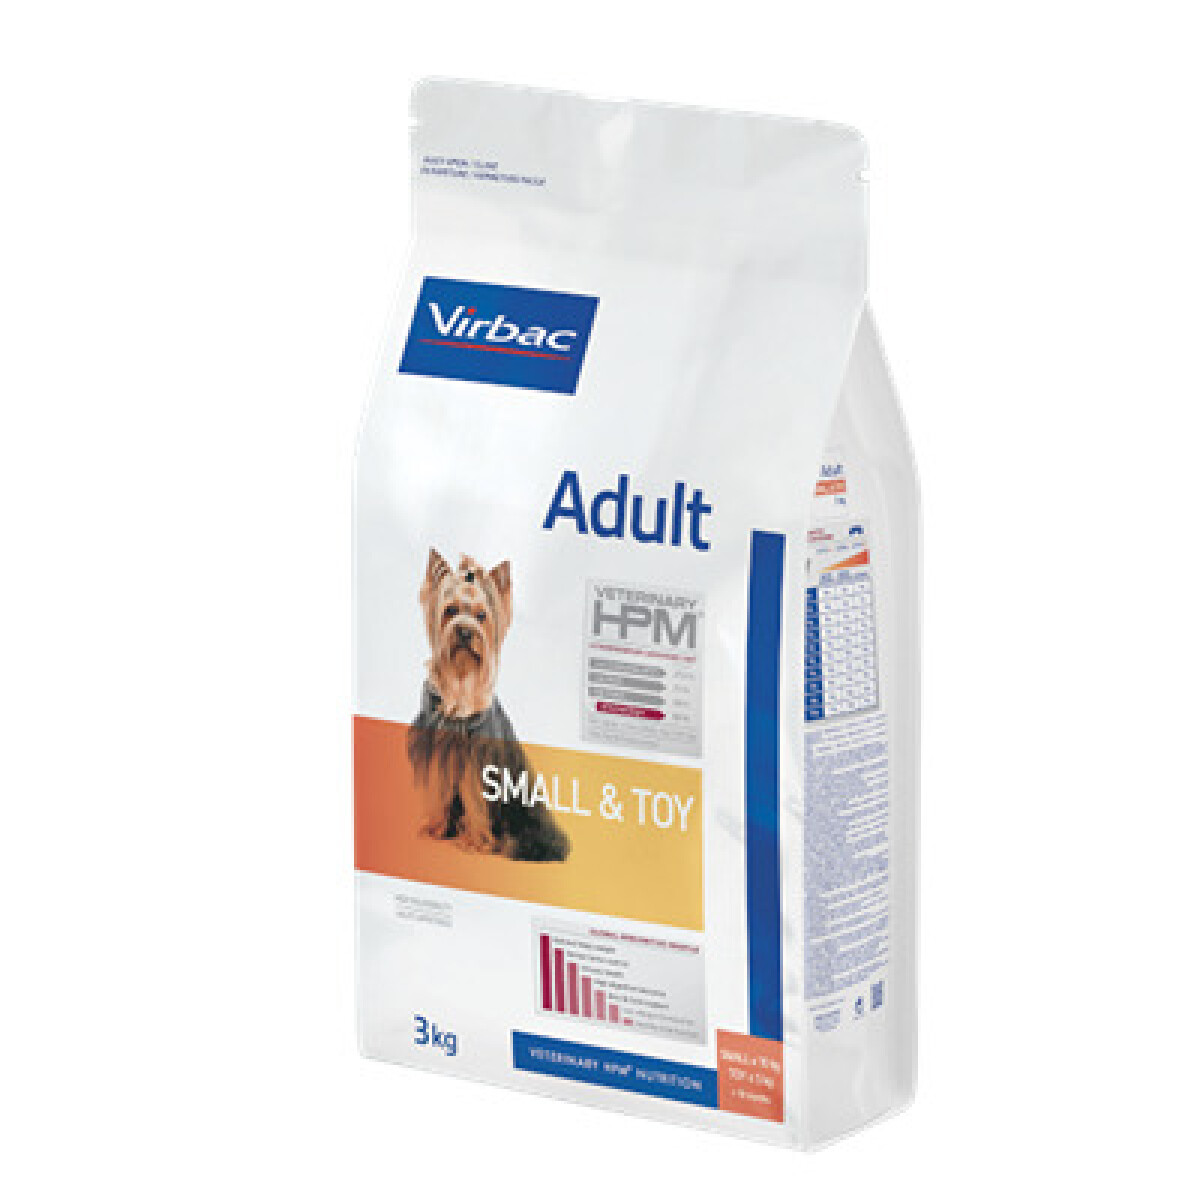 VIRBAC DOG ADULT SMALL & TOY 7 KG - Unica 